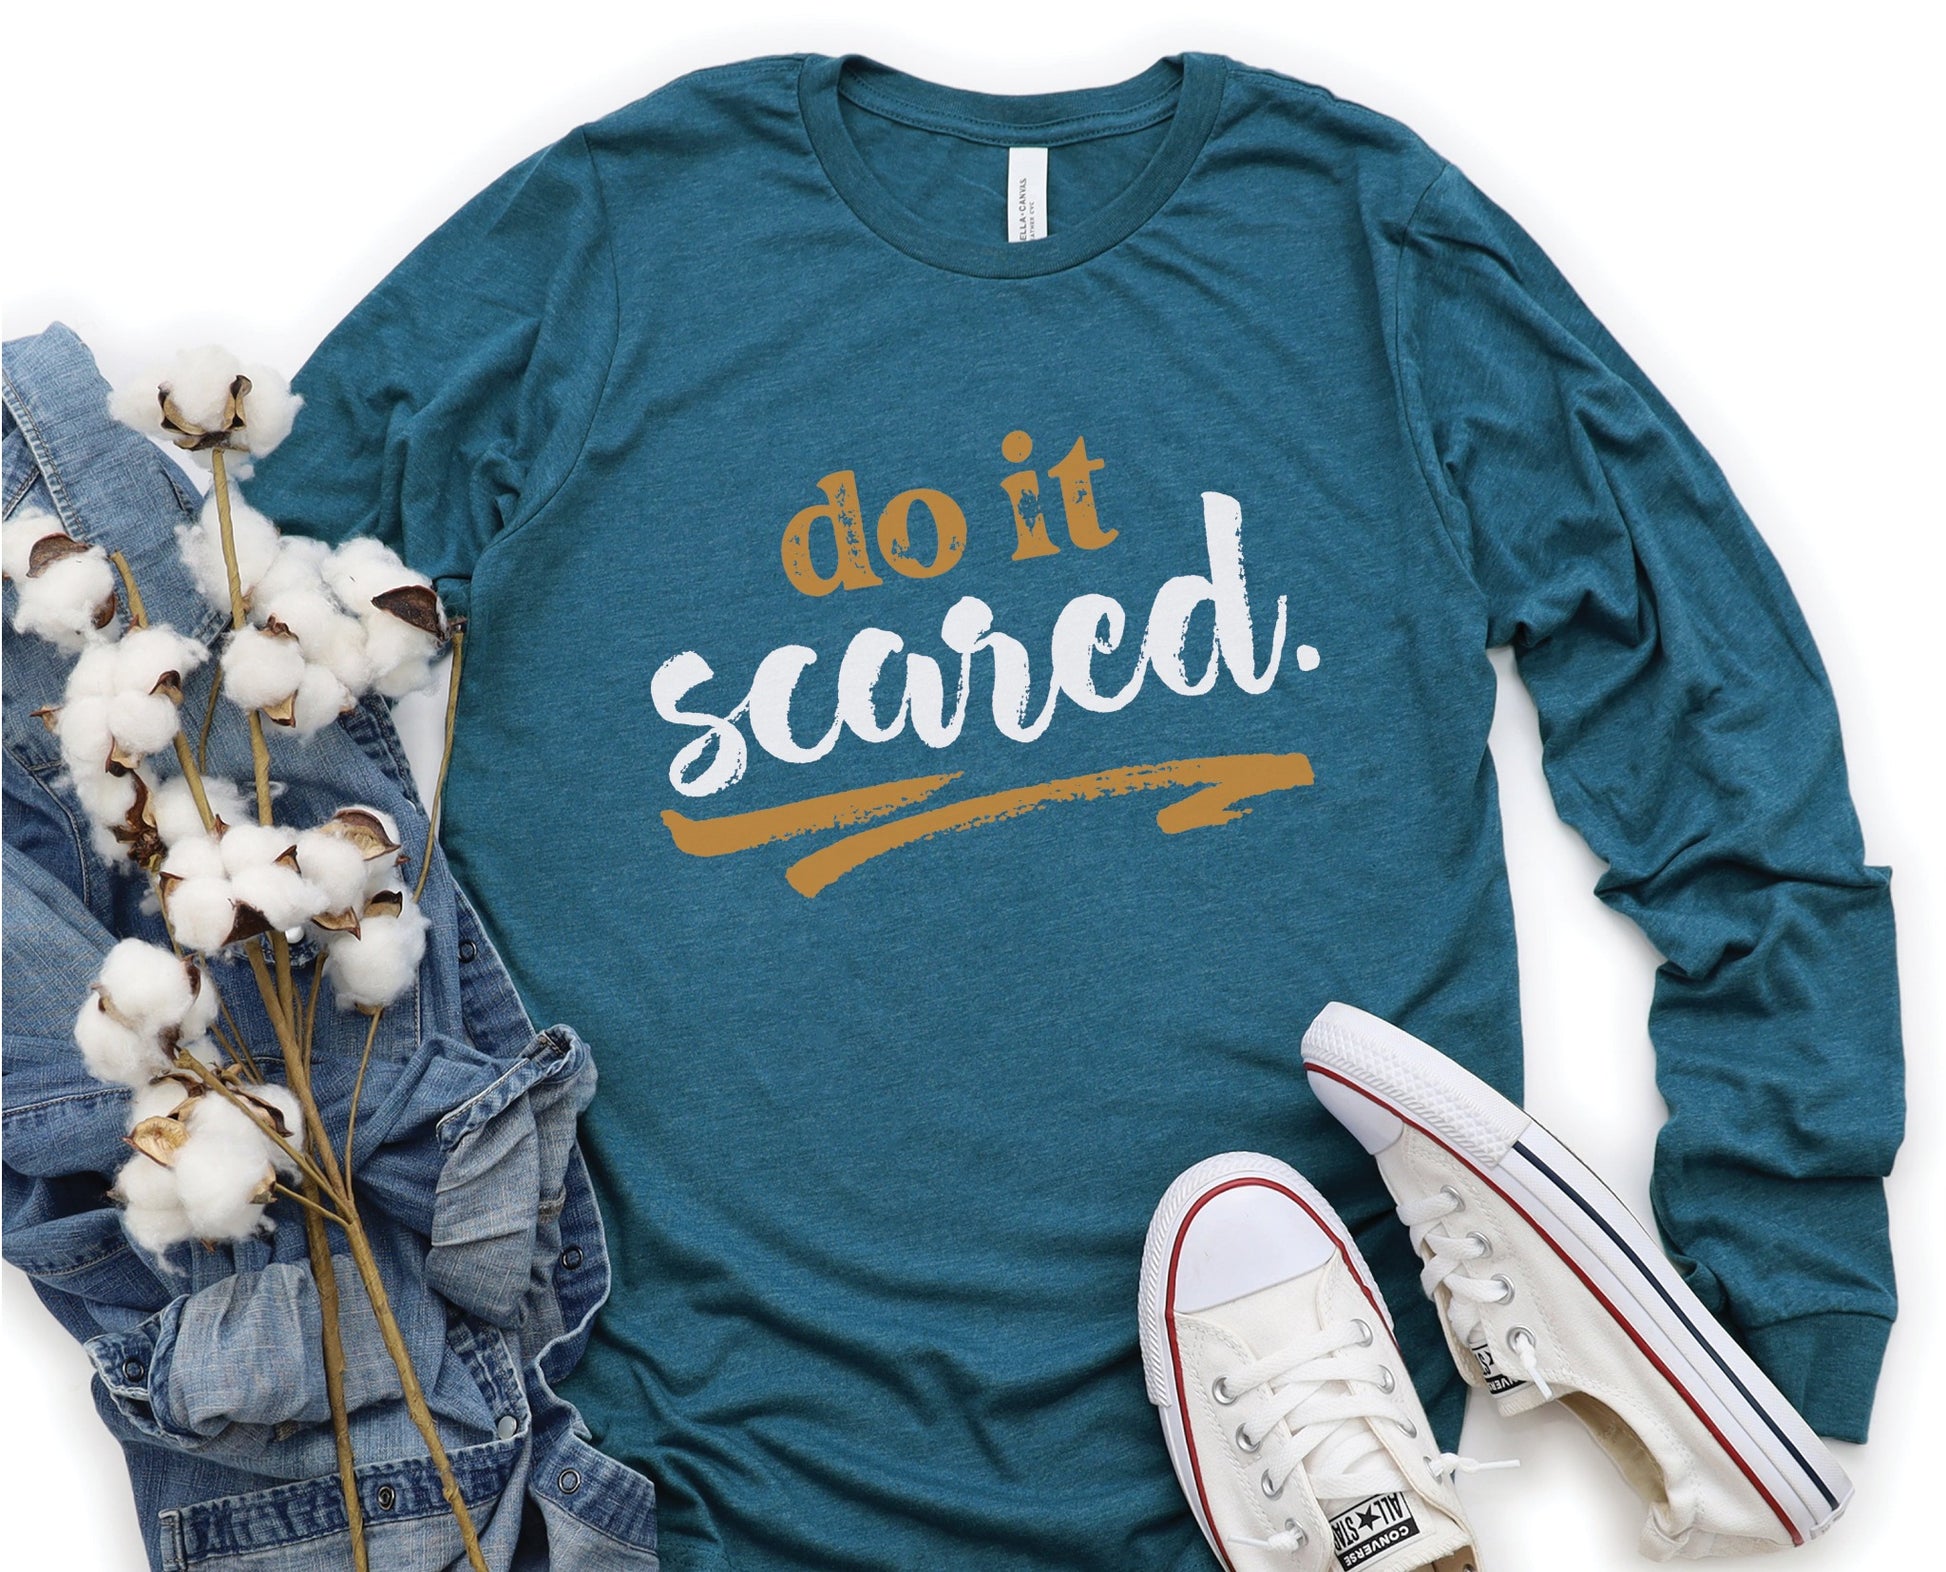 Do It Scared faith over fear 2 Timothy 1:7 do not fear bible verse Christian aesthetic design printed in white and gold on soft heather deep teal unisex long sleeve tee shirt for women and men